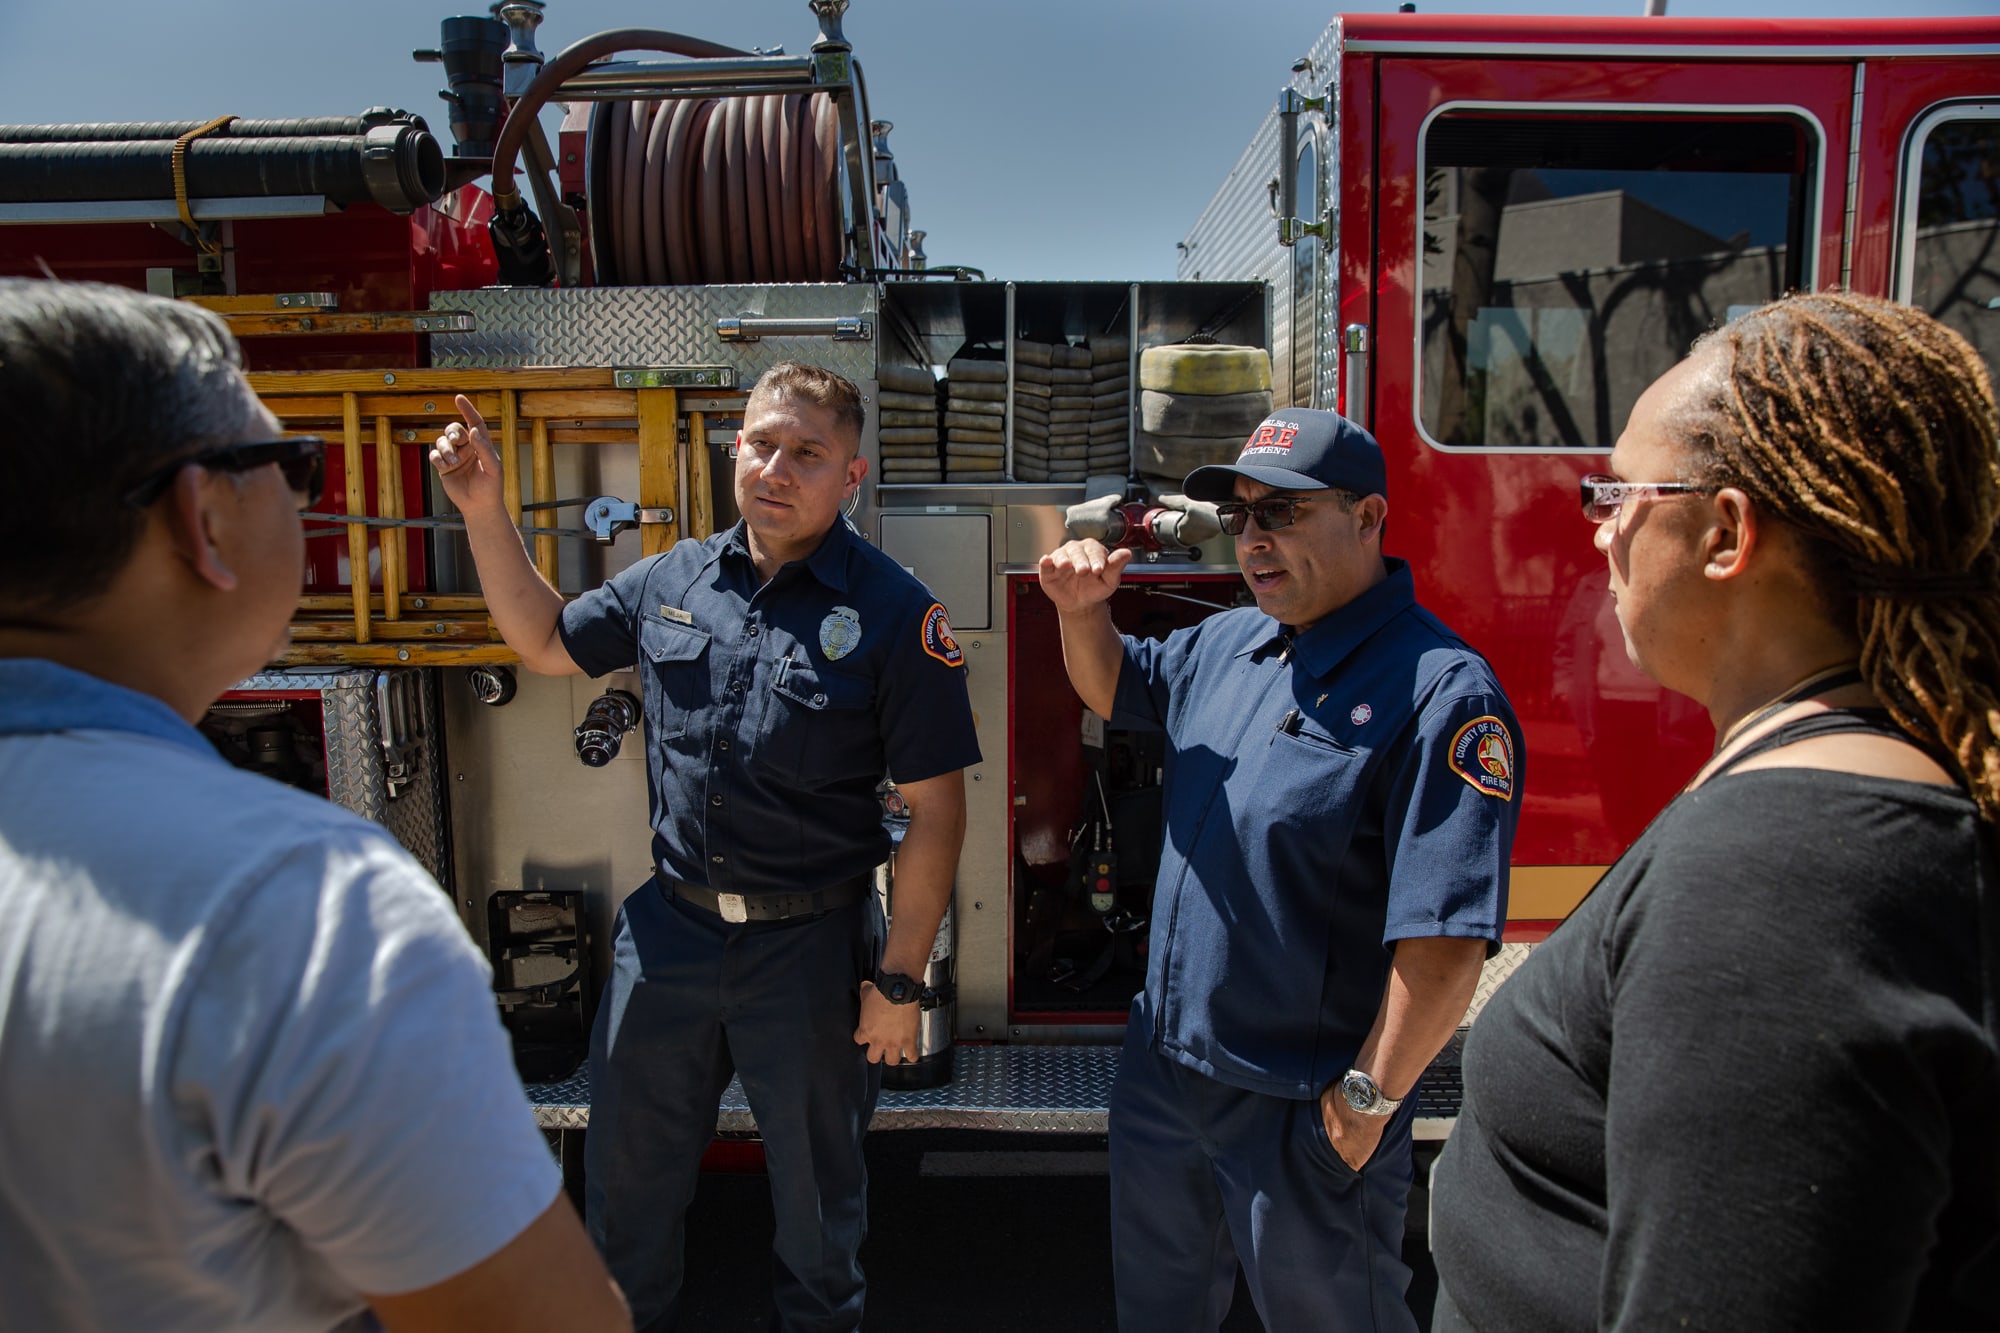 Los Angeles County firefighter Salvador Mejia (left) and Luis Gonzales, a Community Emergency Response Team instructor with the fire department, train members of the public on how to help their neighbors before first responders arrive on the scene.(Brigette Waltermire/News21)